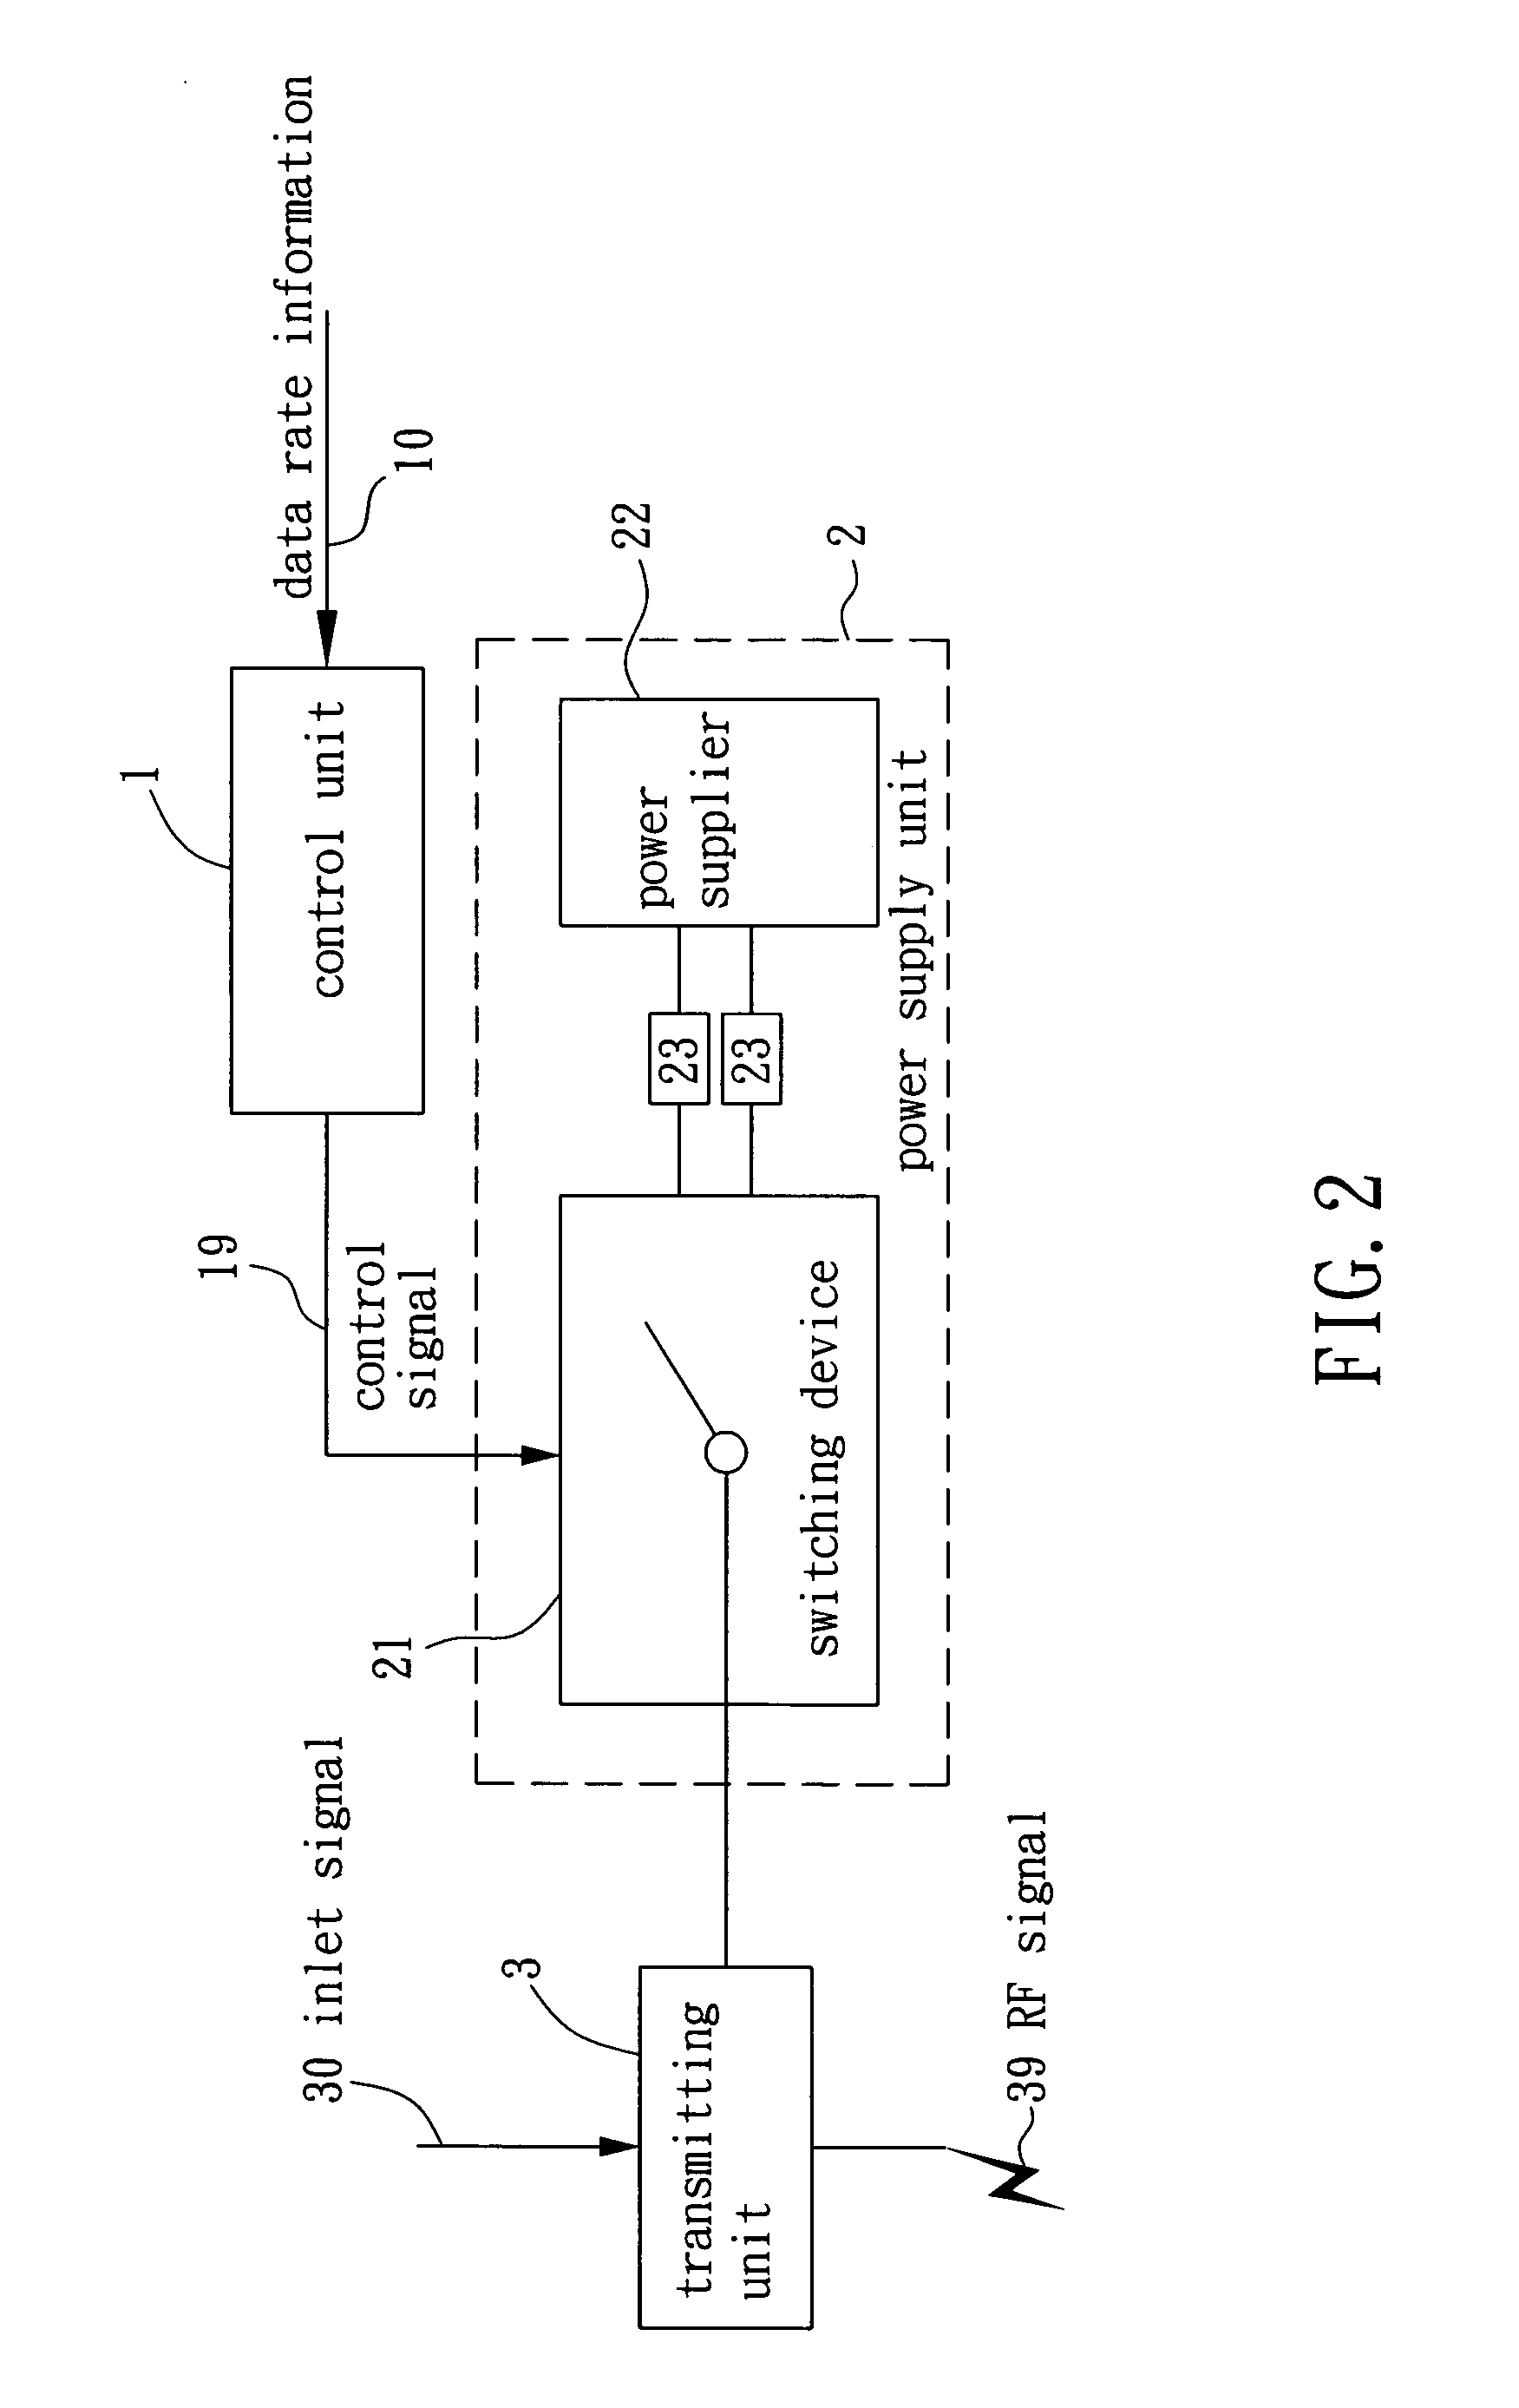 System and method for RF power control